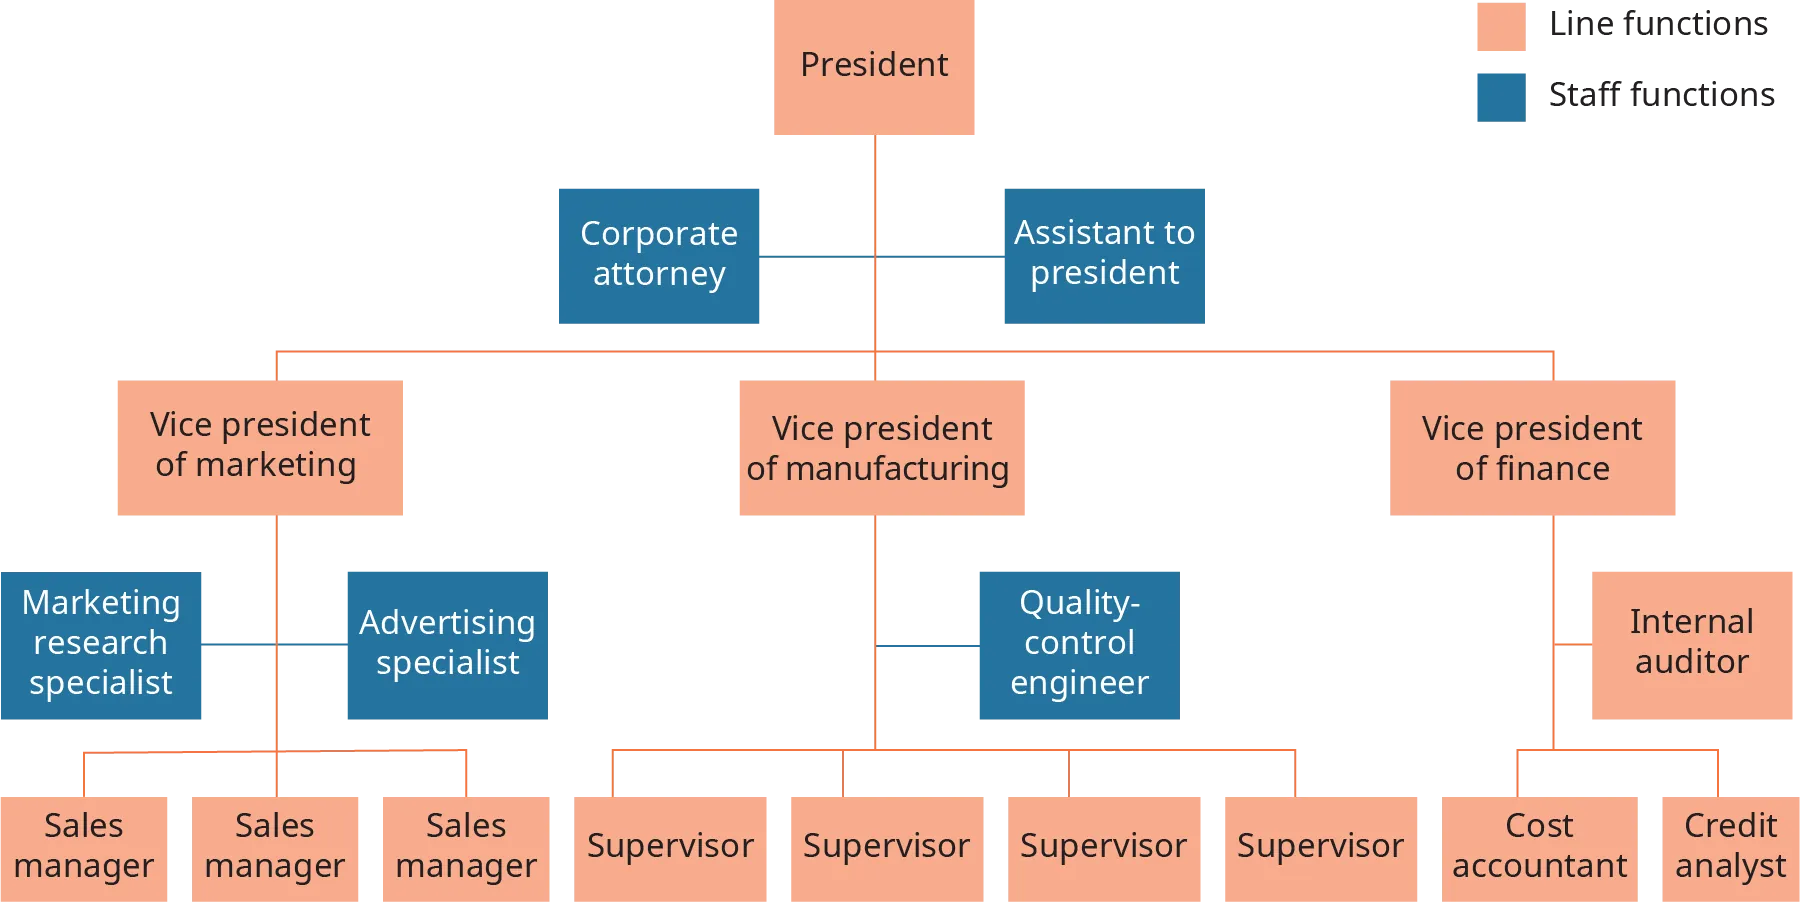 At the top of the diagram is the president, which is shown as a line function. A line extends down, and connects to three separate line functions, which are vice president of marketing, and vice president of manufacturing, and vice president of finance. On each side of this connective line are staff functions, which are corporate attorney, and assistant to president. A line extends down from vice president of marketing to 3 line functions, which are each labeled sales manager. On each side of this connective line are staff functions, shown as marketing research specialist, and advertising specialist. A line extends down from vice president, and connects to 3 line functions, each is labeled, supervisor. A staff function extends from the connective line, and is quality control engineer. A line extends down from vice president of finance, and connects to 2 line functions, cost accountant, and credit analysis. Between these 2 positions is an internal auditor, which is a line function.